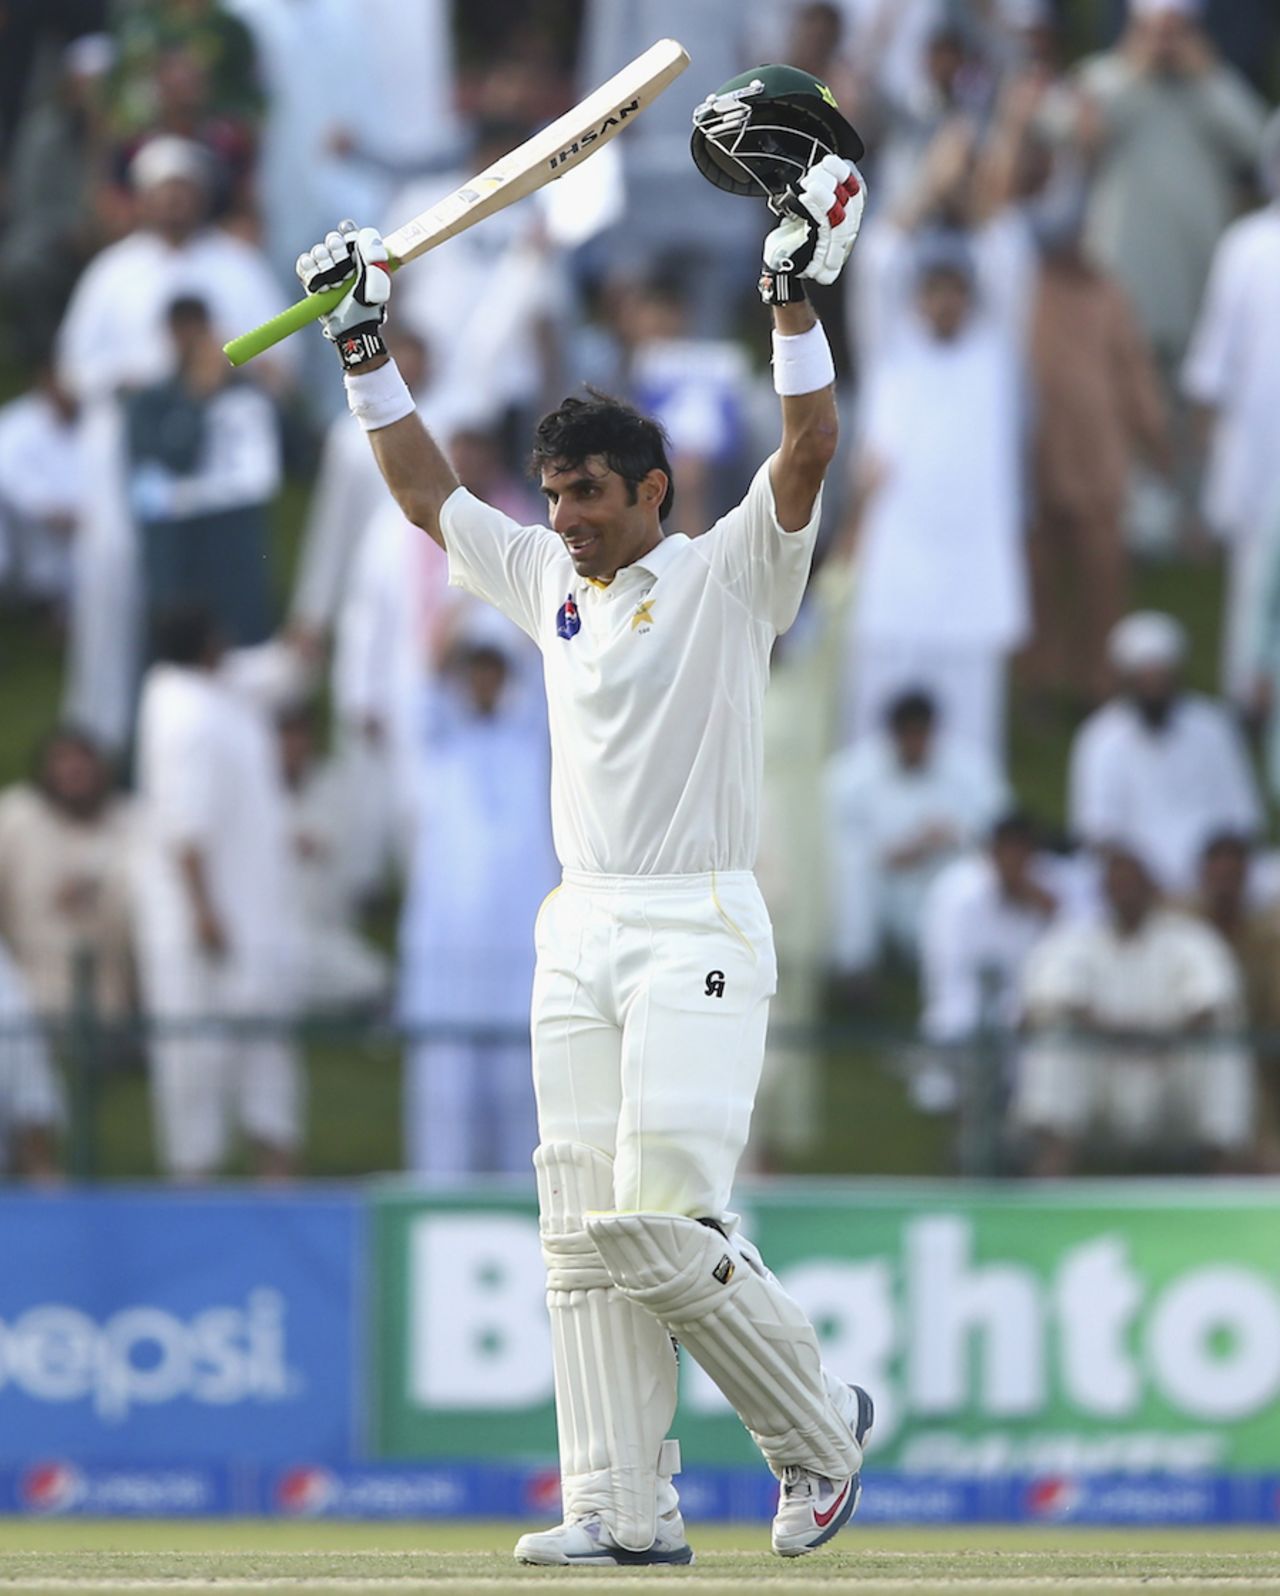 Misbah-ul-Haq acknowledges the crowd after his hundred, Pakistan v Australia, 2nd Test, Abu Dhabi, 2nd day, October 31, 2014